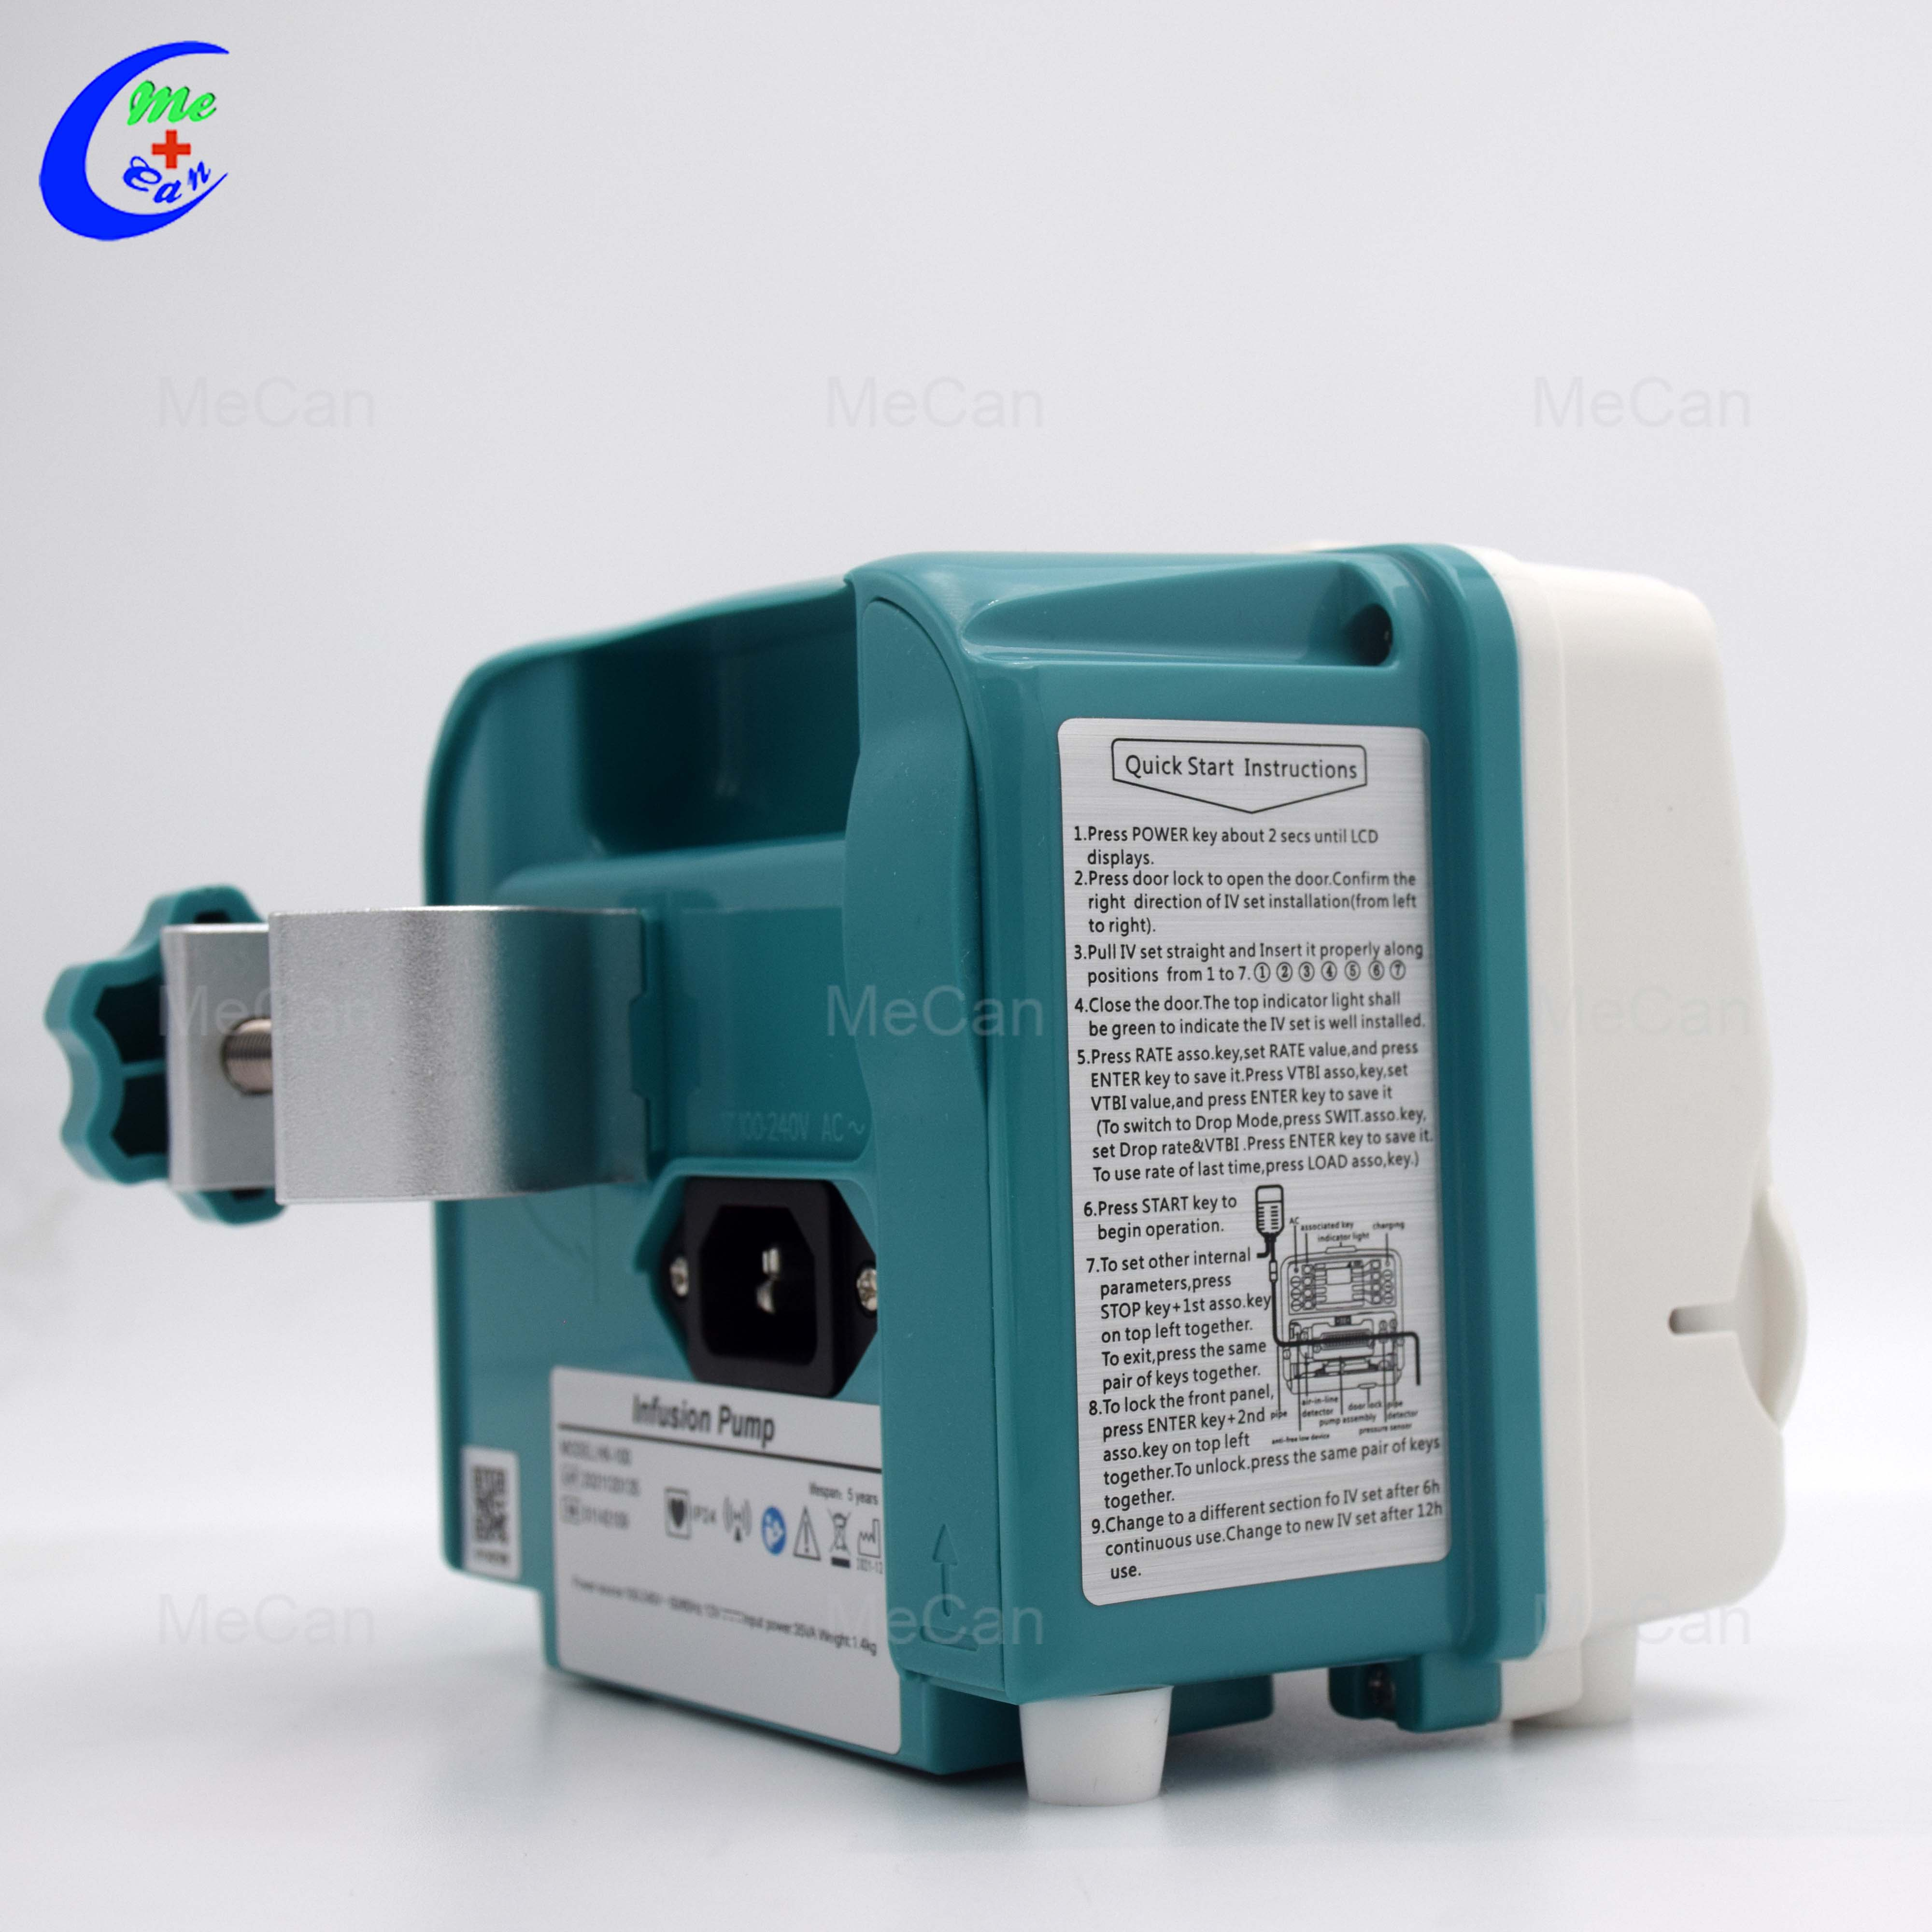 Best Portable Electric Medical Emergency Infusion Pump Company - MeCan Medical